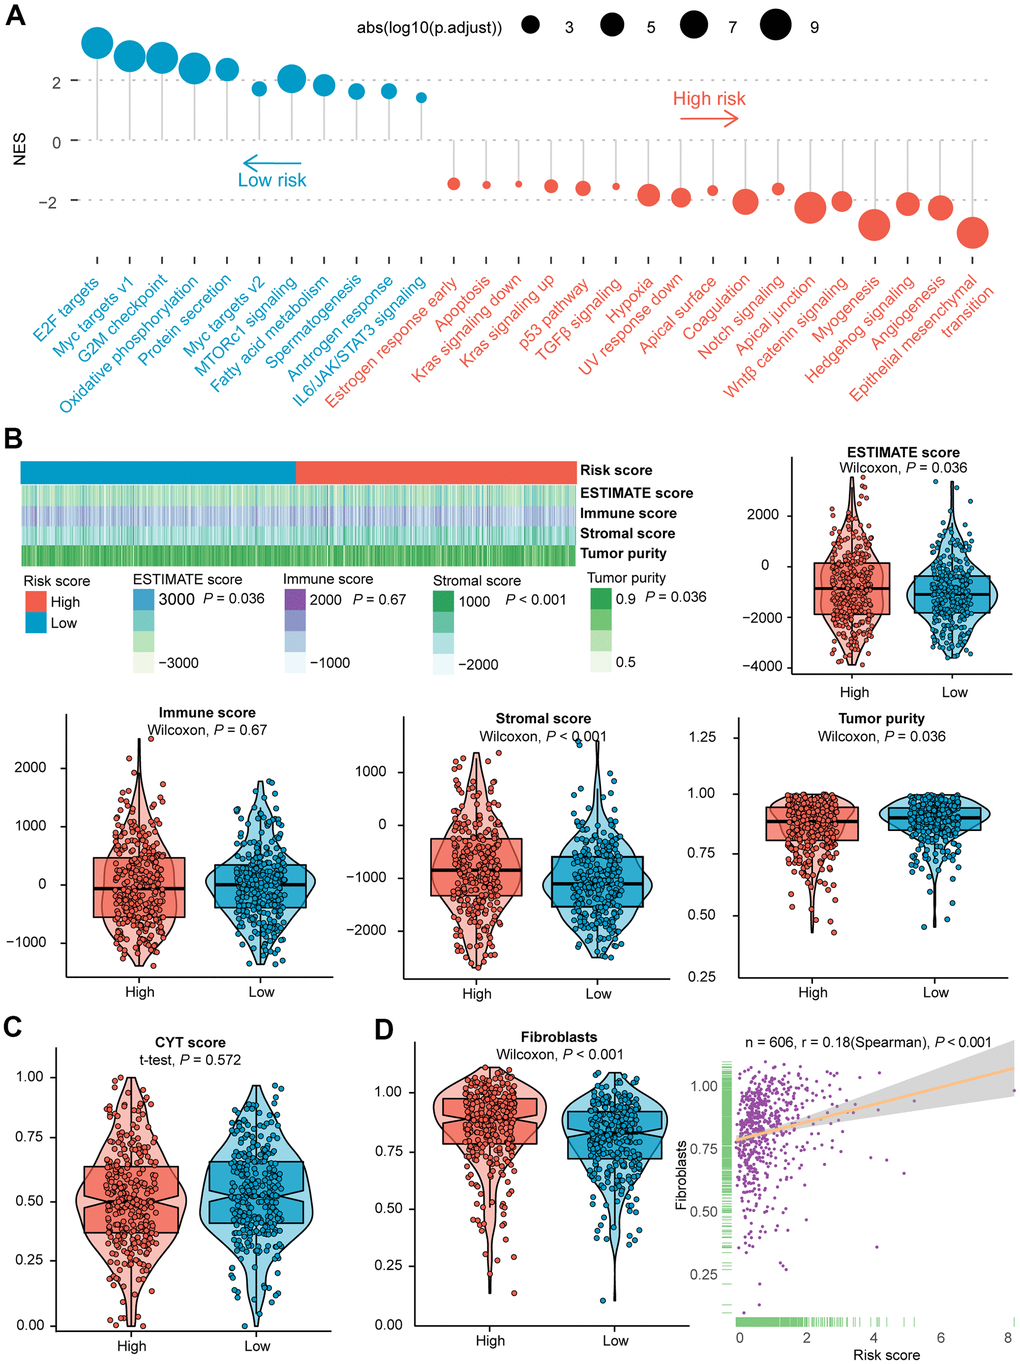 Evaluation of the role of IRGs-based risk score in the training cohort. (A) Results of GSEA of the high-risk group (red) compared with the low-risk group (blue). Color toward gray represents no statistical significance. (B) Heatmap and violin plots of the ESTIMATE score, immune score, stromal score, tumor purity between high- and low- risk subtypes. (C) Violin plot of the CYT score between high- and low- risk subtypes. (D) Violin plot of fibroblasts between two subtypes, and the association between risk score and the NES of fibroblasts. Statistical significance at the level of ns ≥ 0.05, * 